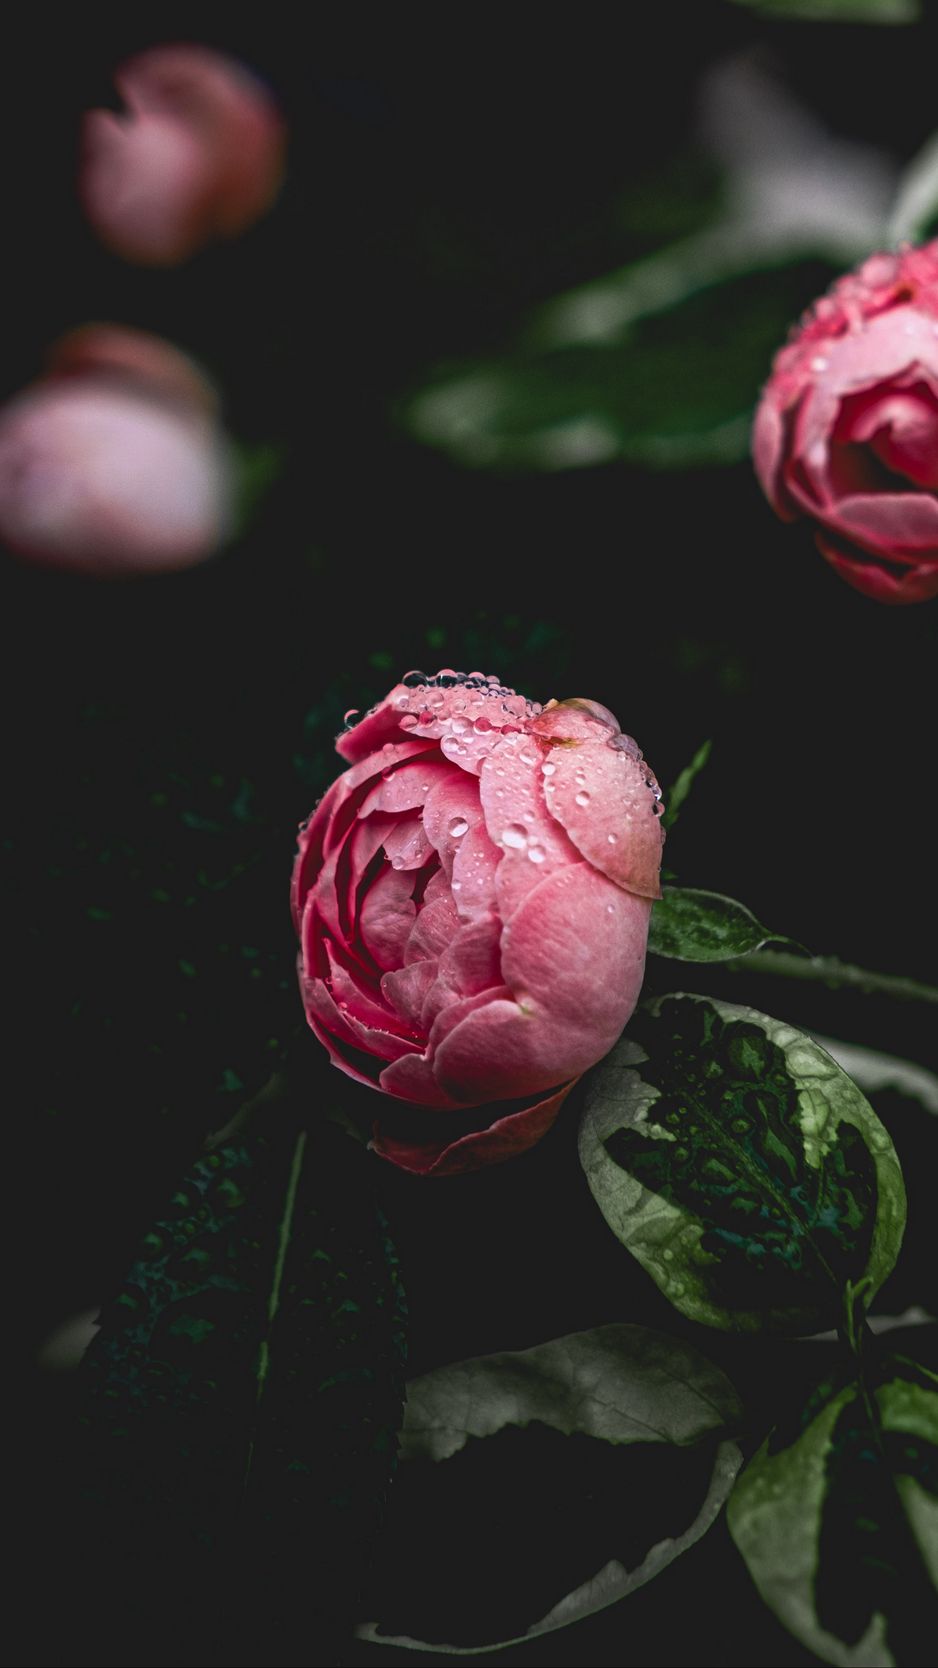 Download wallpaper 938x1668 peony, flower, pink, drops, dew iphone 8/7/6s/6  for parallax hd background